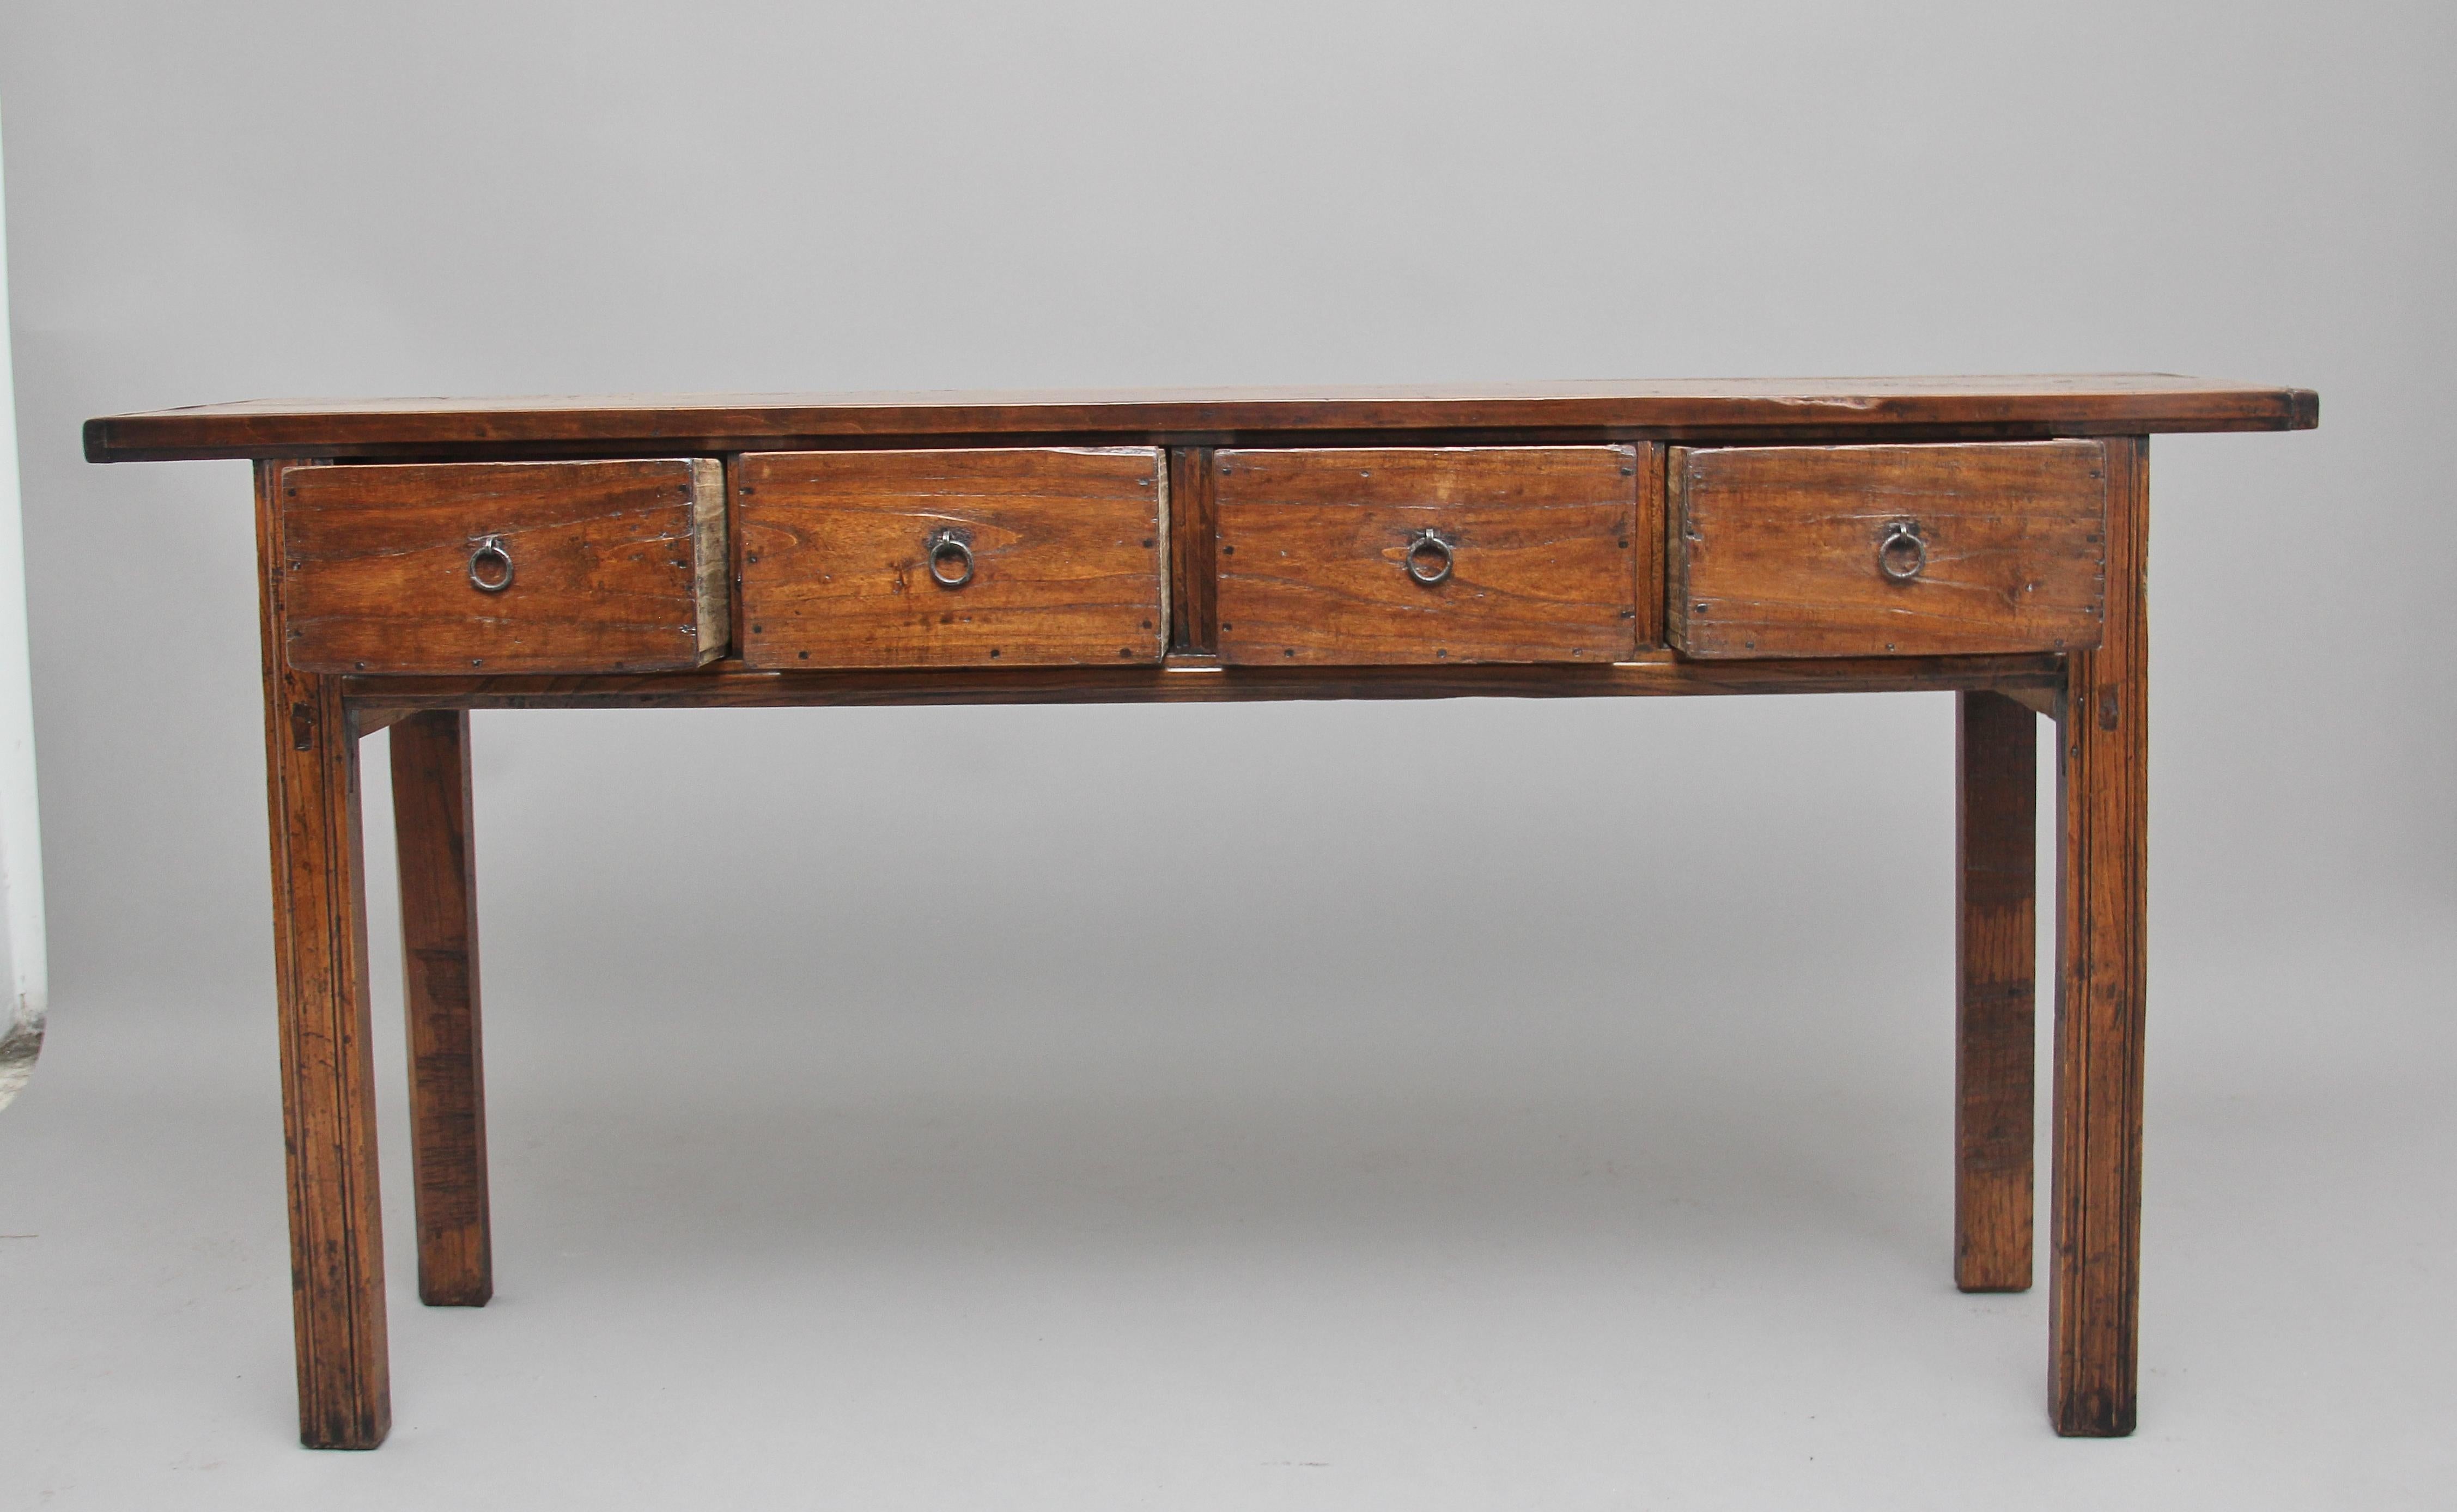 19th century Chinese elm dresser base / serving table, having a nice rustic rectangular top above four-drawers with original brass ring pull handles, supported on four square legs. Lovely color and in fantastic condition, circa 1880.